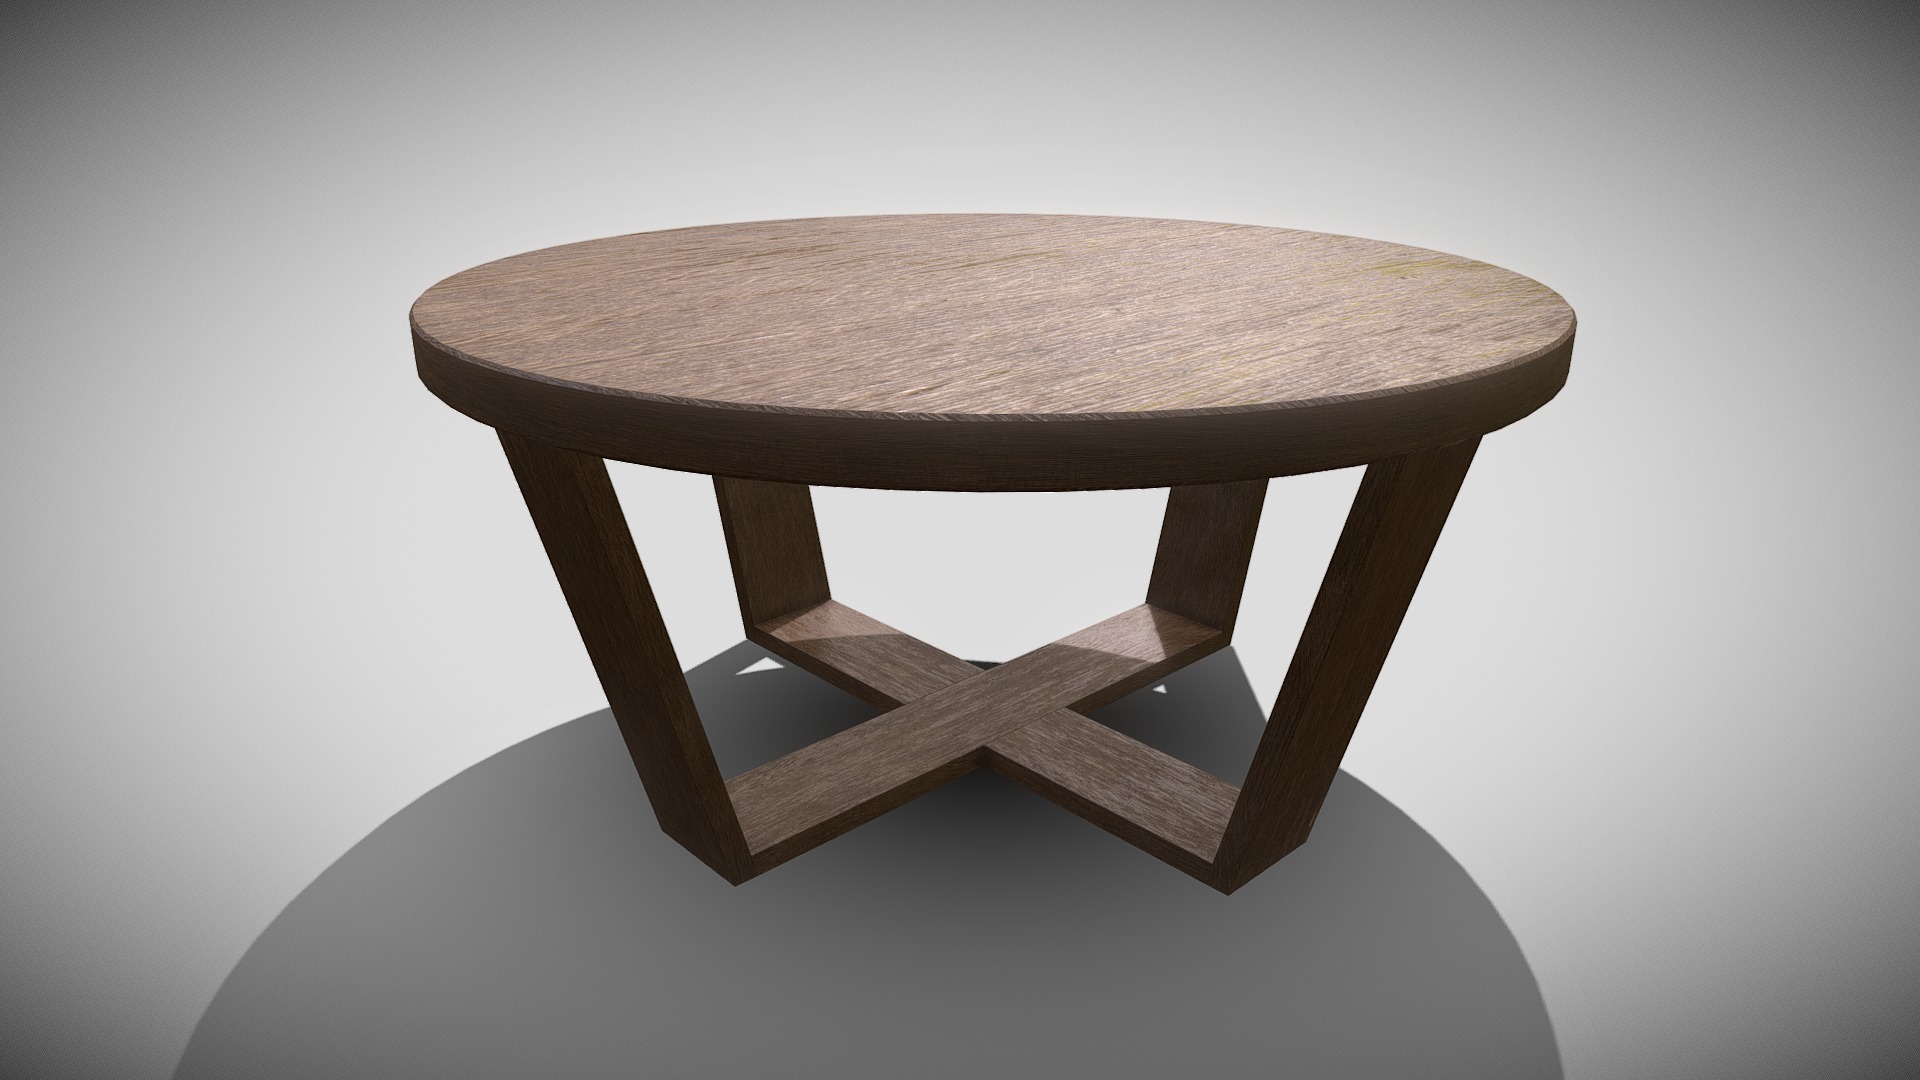 3D model Coffeetable Round - This is a 3D model of the Coffeetable Round. The 3D model is about a wooden table on a white background.